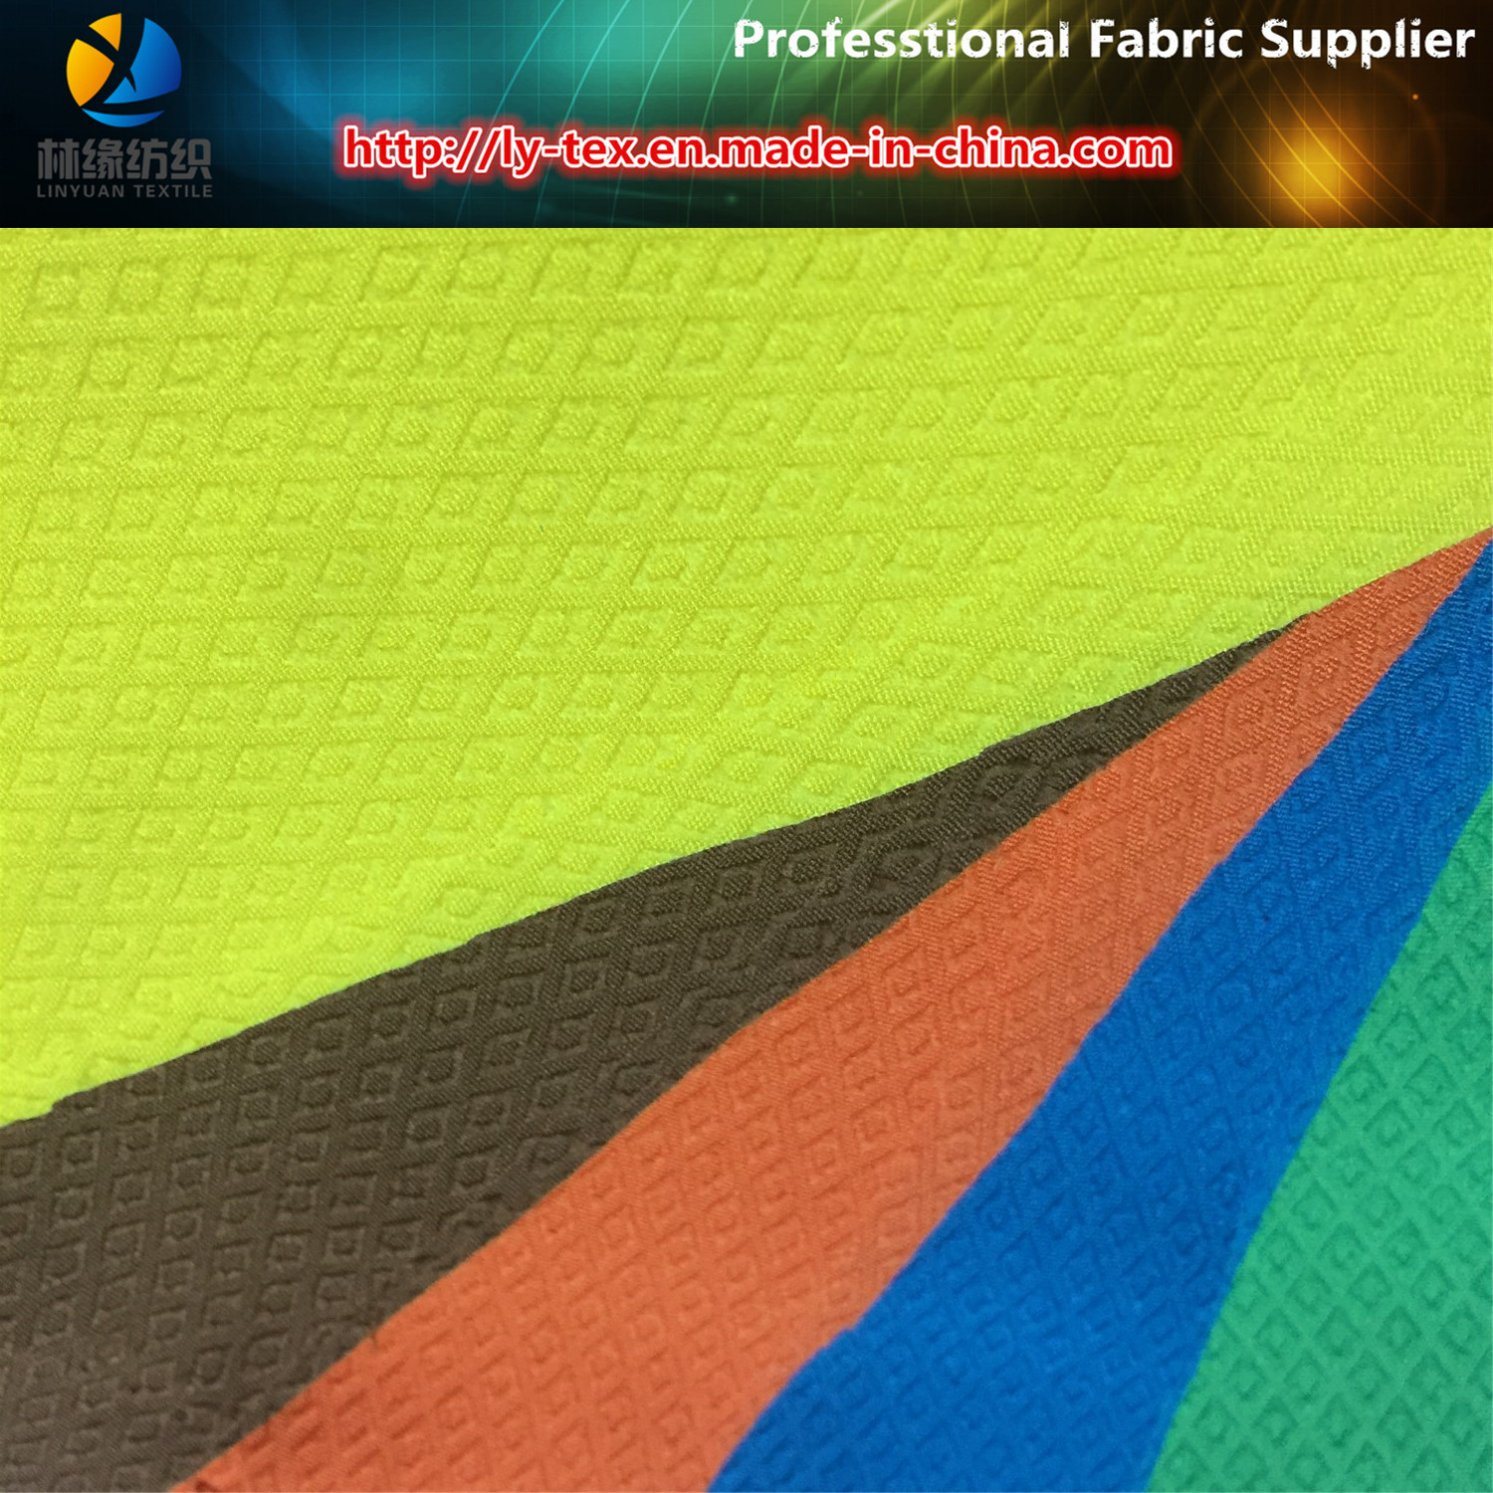 Polyester 2 Ways Stretch/Spandex Jacquard Fabric in Diamond for Mountaineering Suit